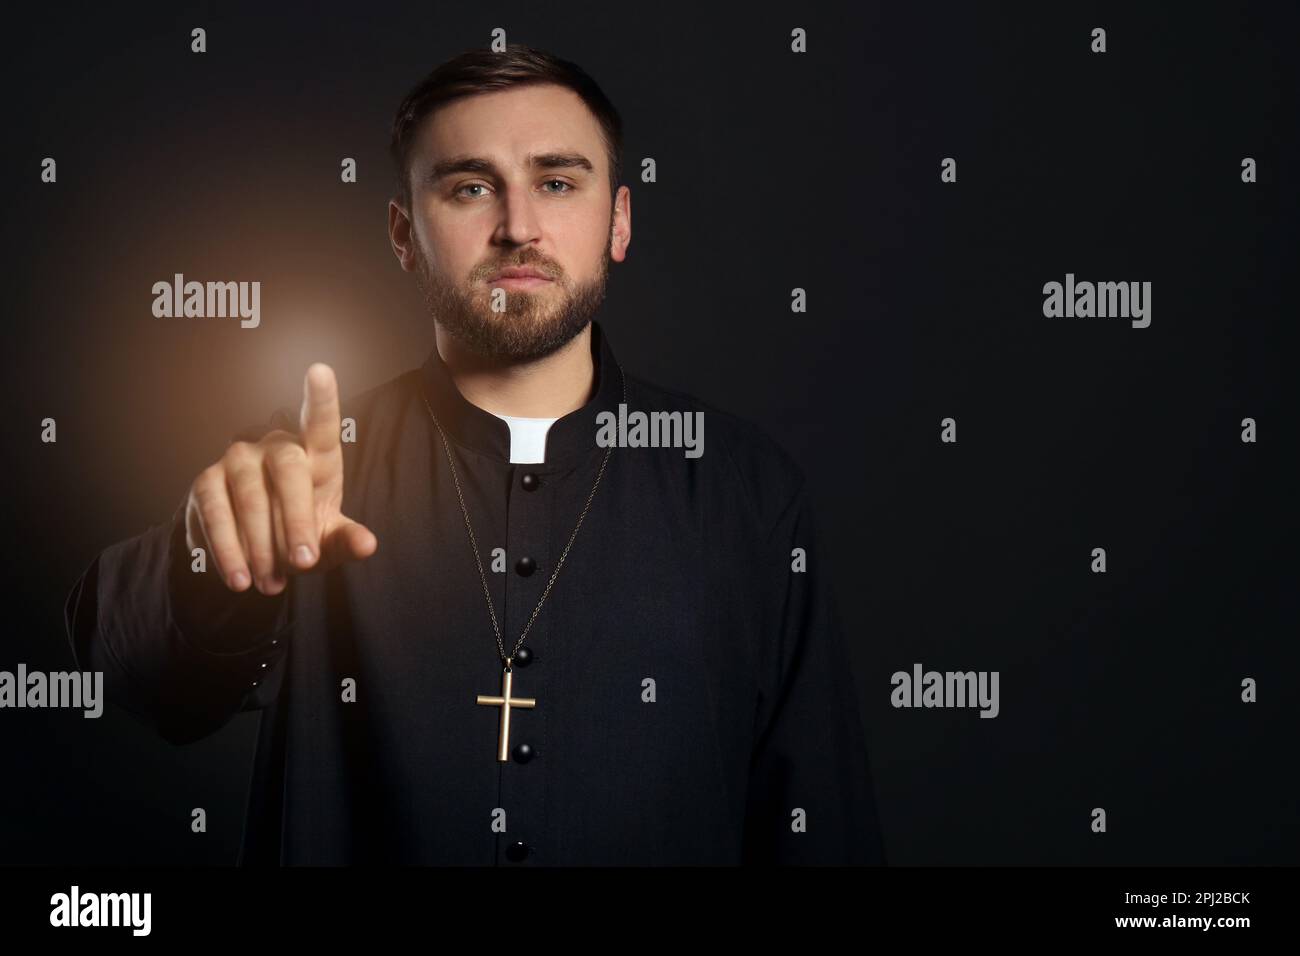 Priest wearing cassock with clerical collar on black background. Space for text Stock Photo